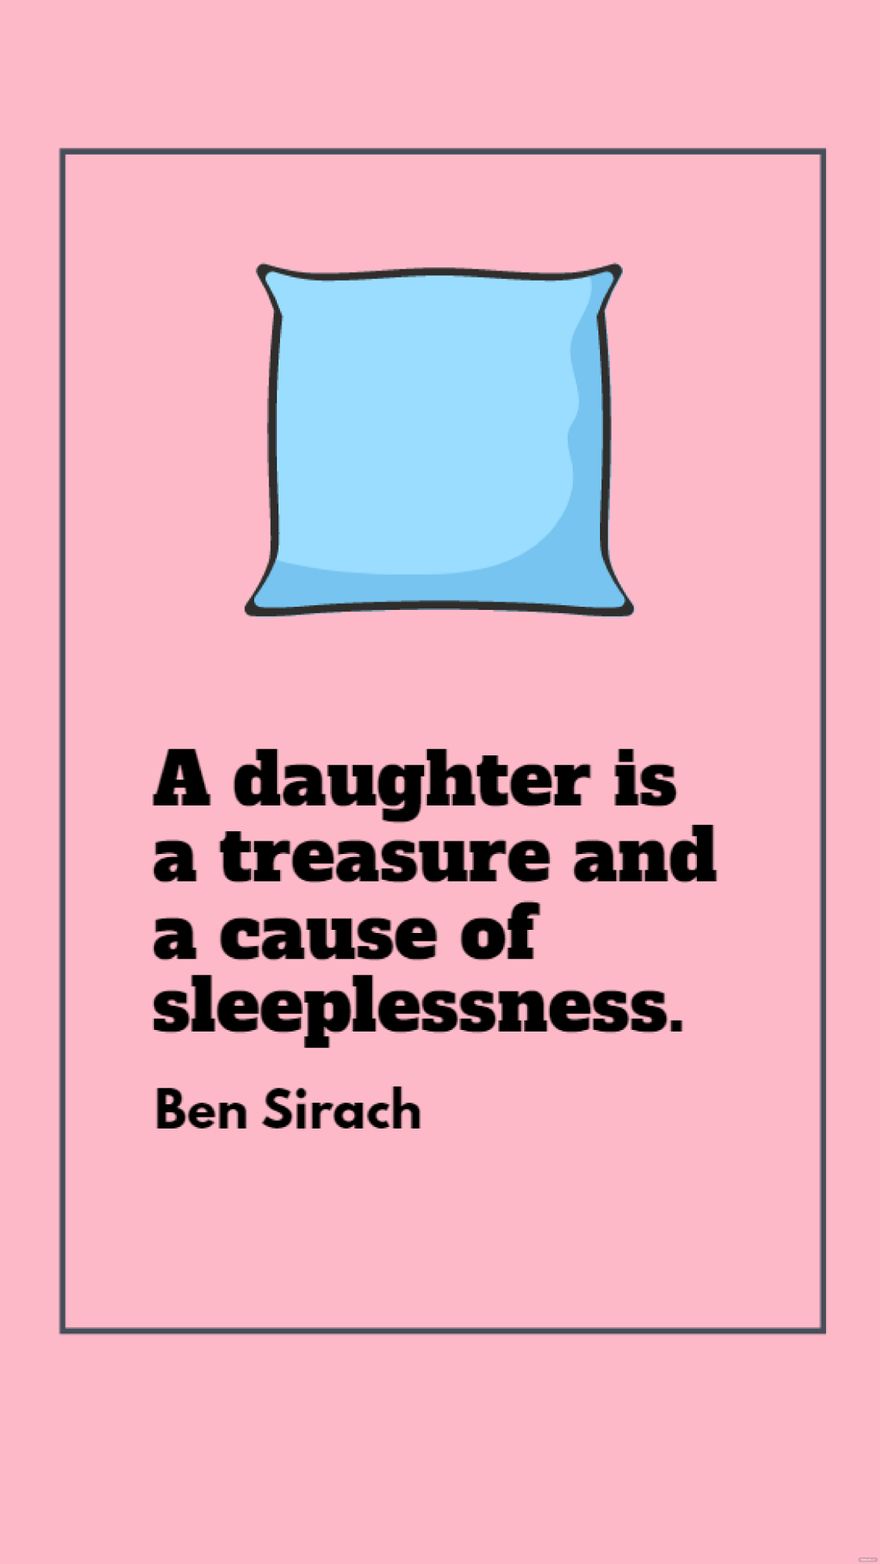 Ben Sirach - A daughter is a treasure and a cause of sleeplessness.